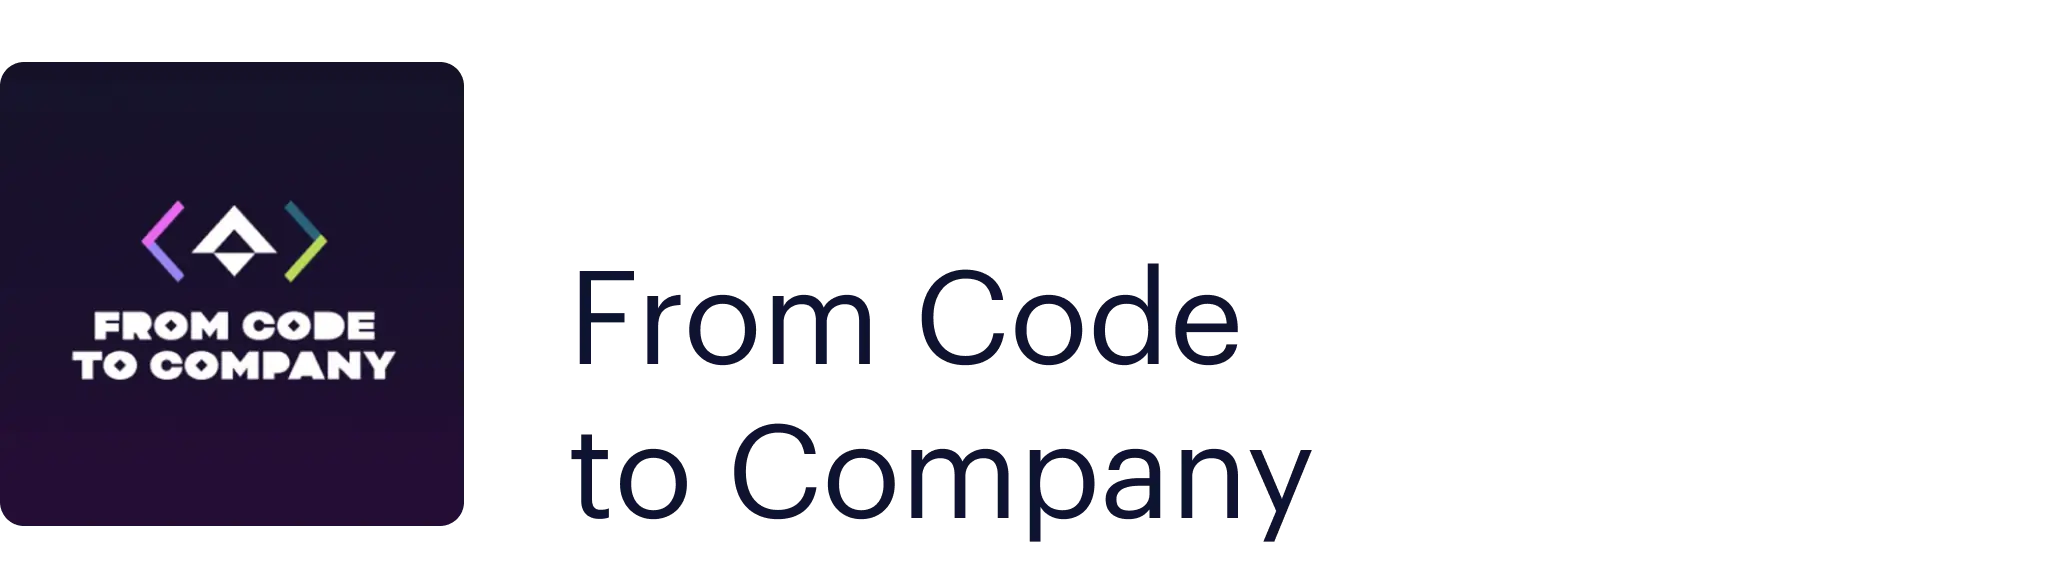 From Code to Company